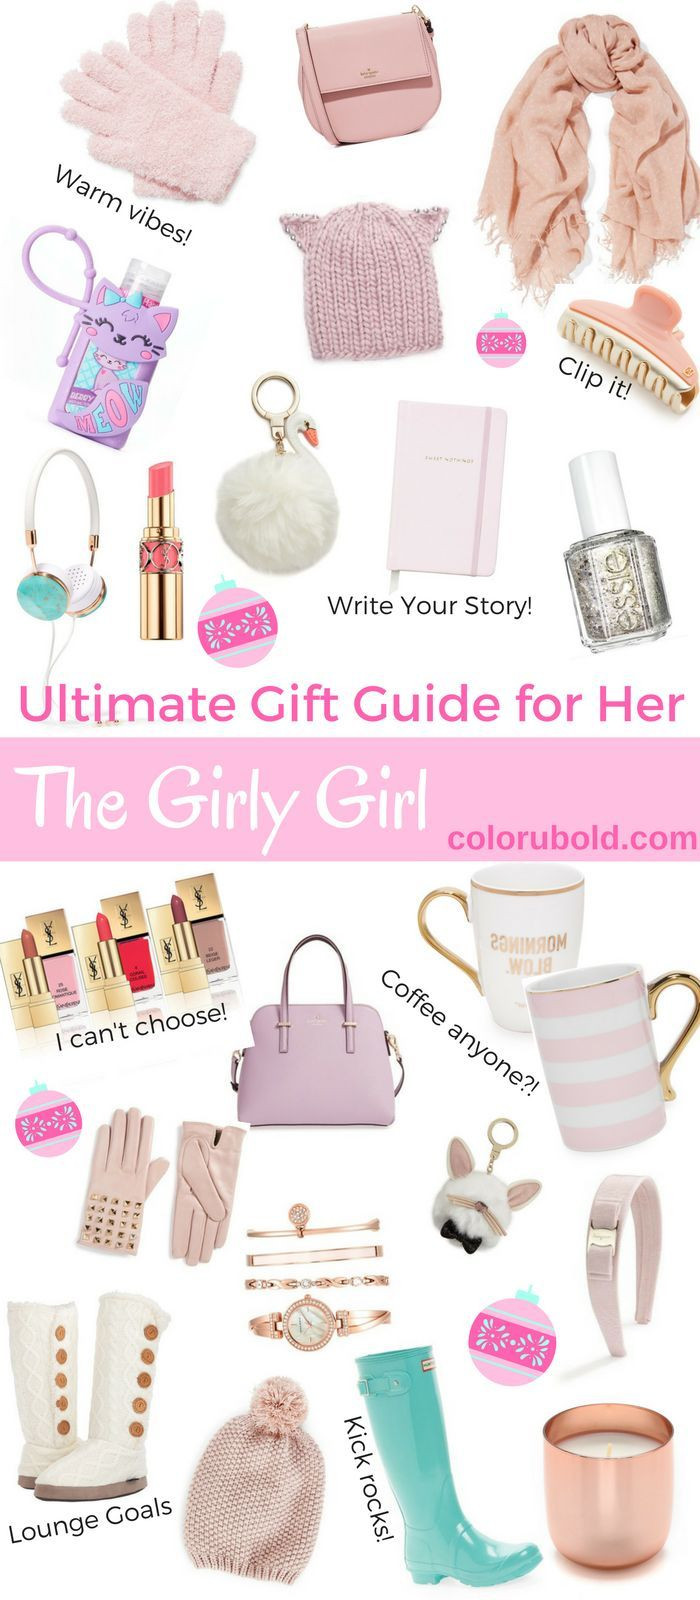 Girl Birthday Gift Ideas
 The Ultimate Gift Guide for the Girly Girl